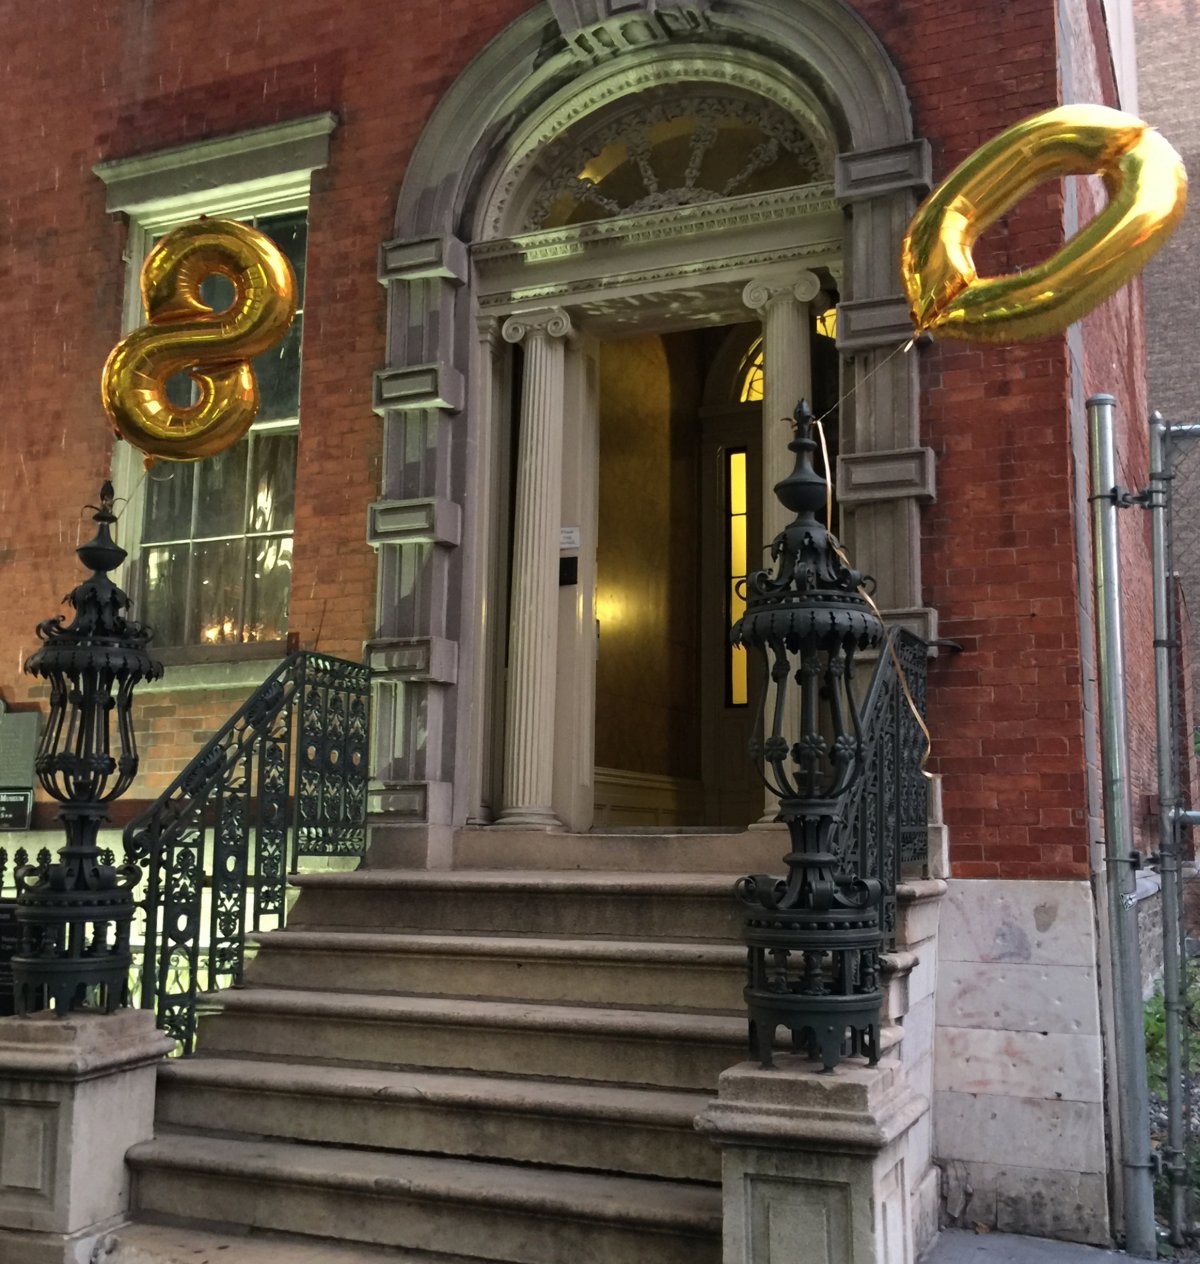 The stoop of the Merchant’s House Museum on E. Fourth St. was decked out with balloons for its recent 80th anniversary event. Photo courtesy Merchant's House